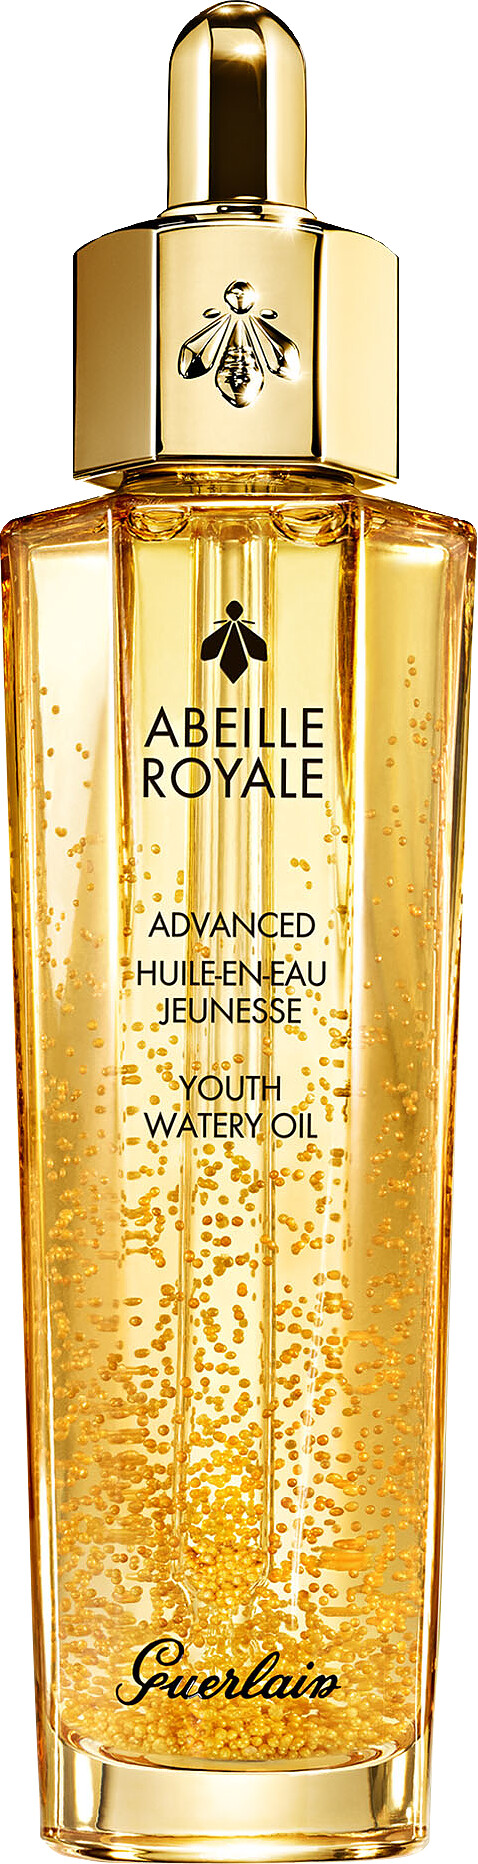 Abeille Royale Advanced Youth Watery Oil - Guerlain - 50 ml - cos